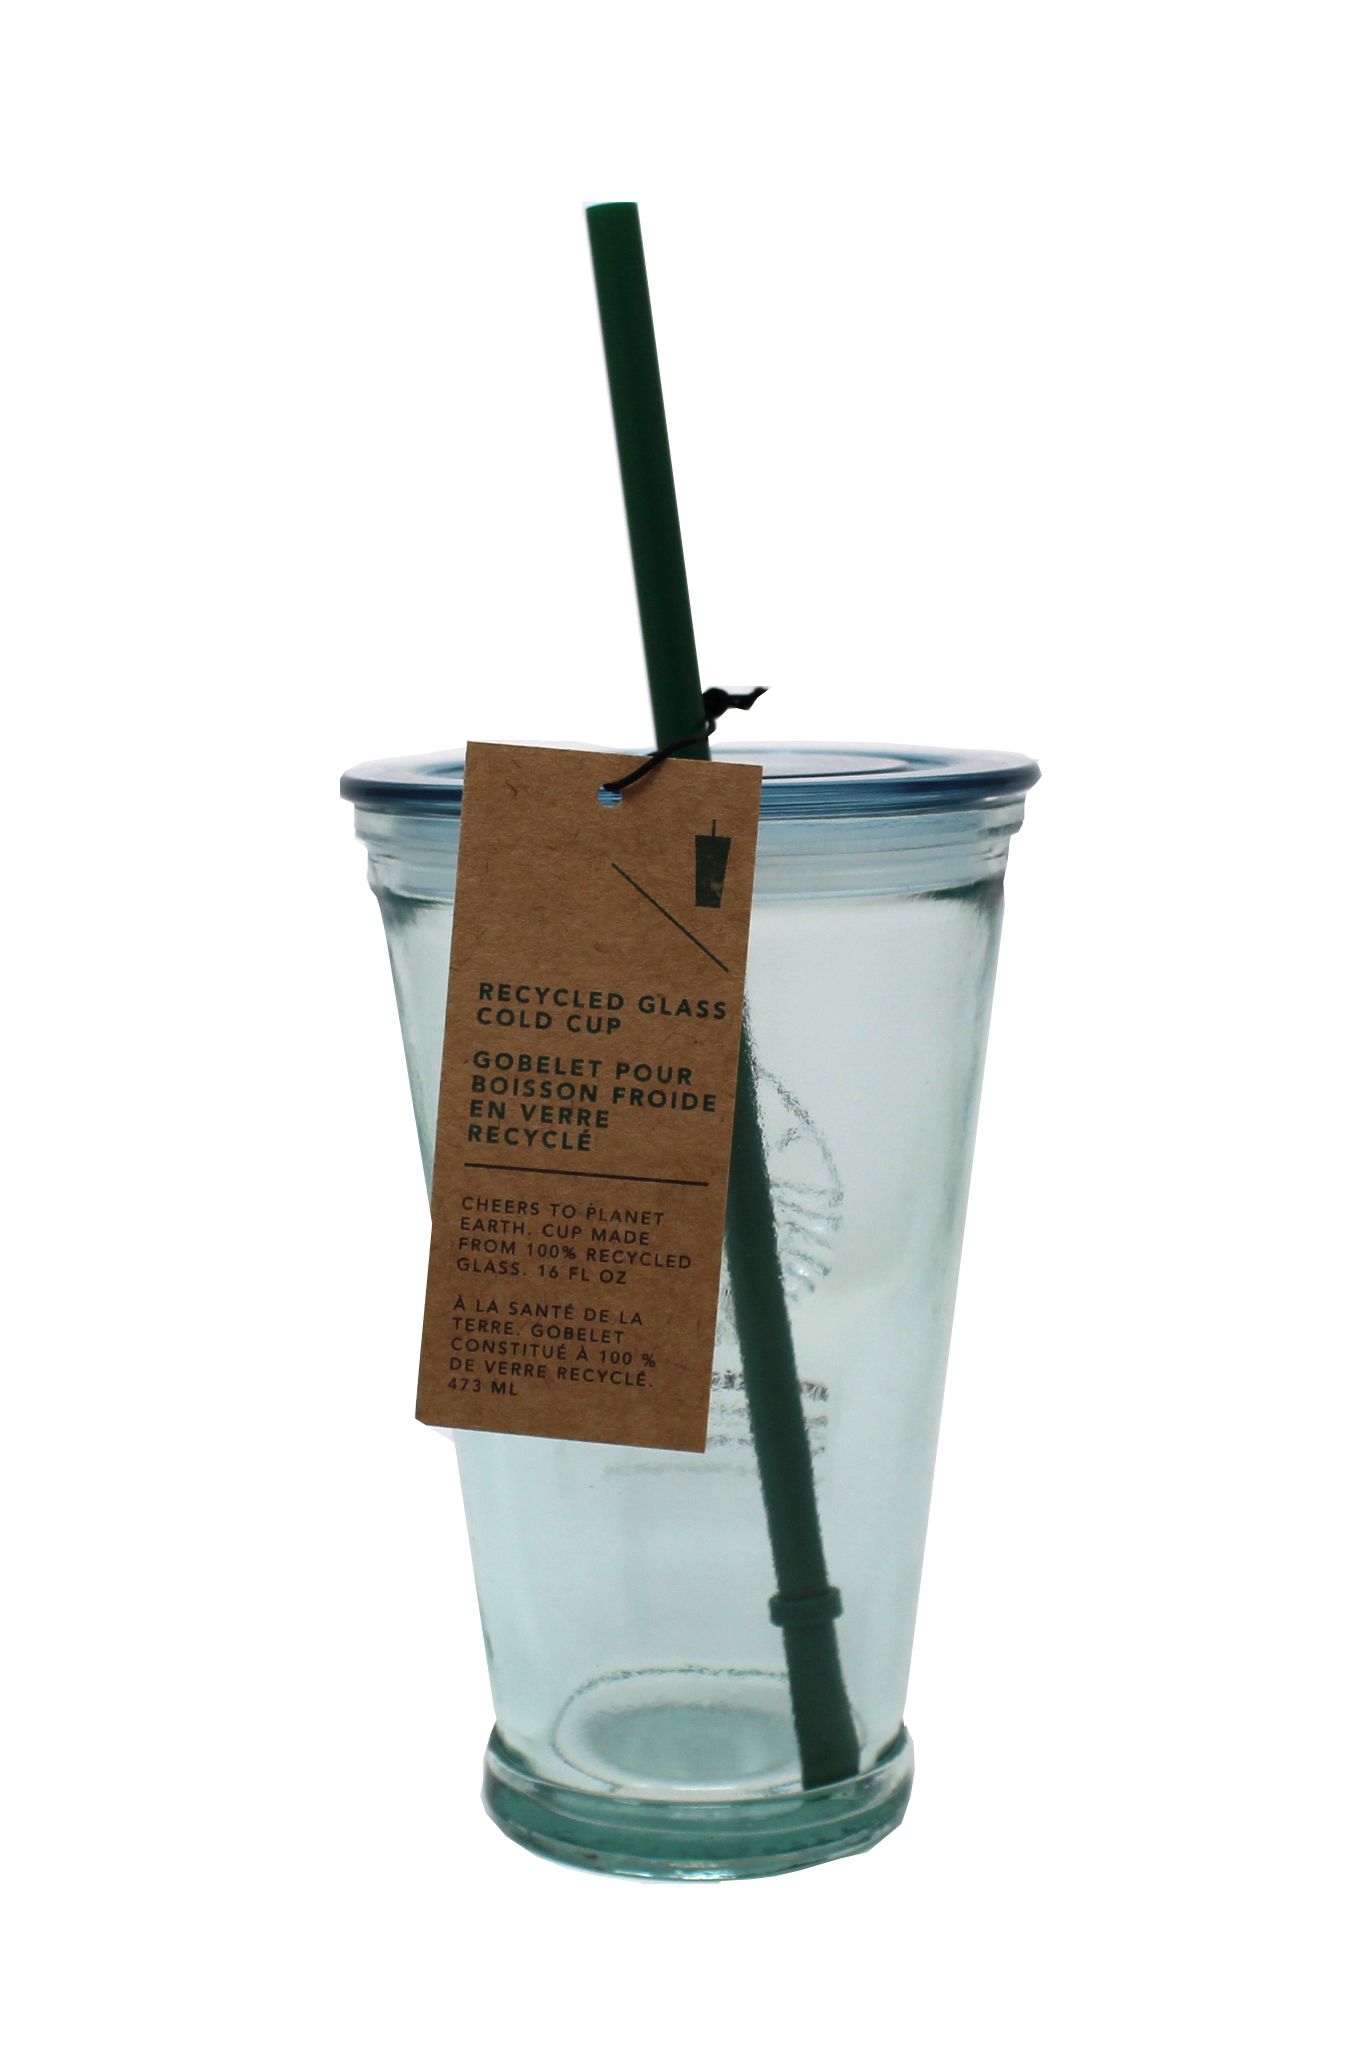 See Starbucks's Recycled Glass Cups and Water Bottles